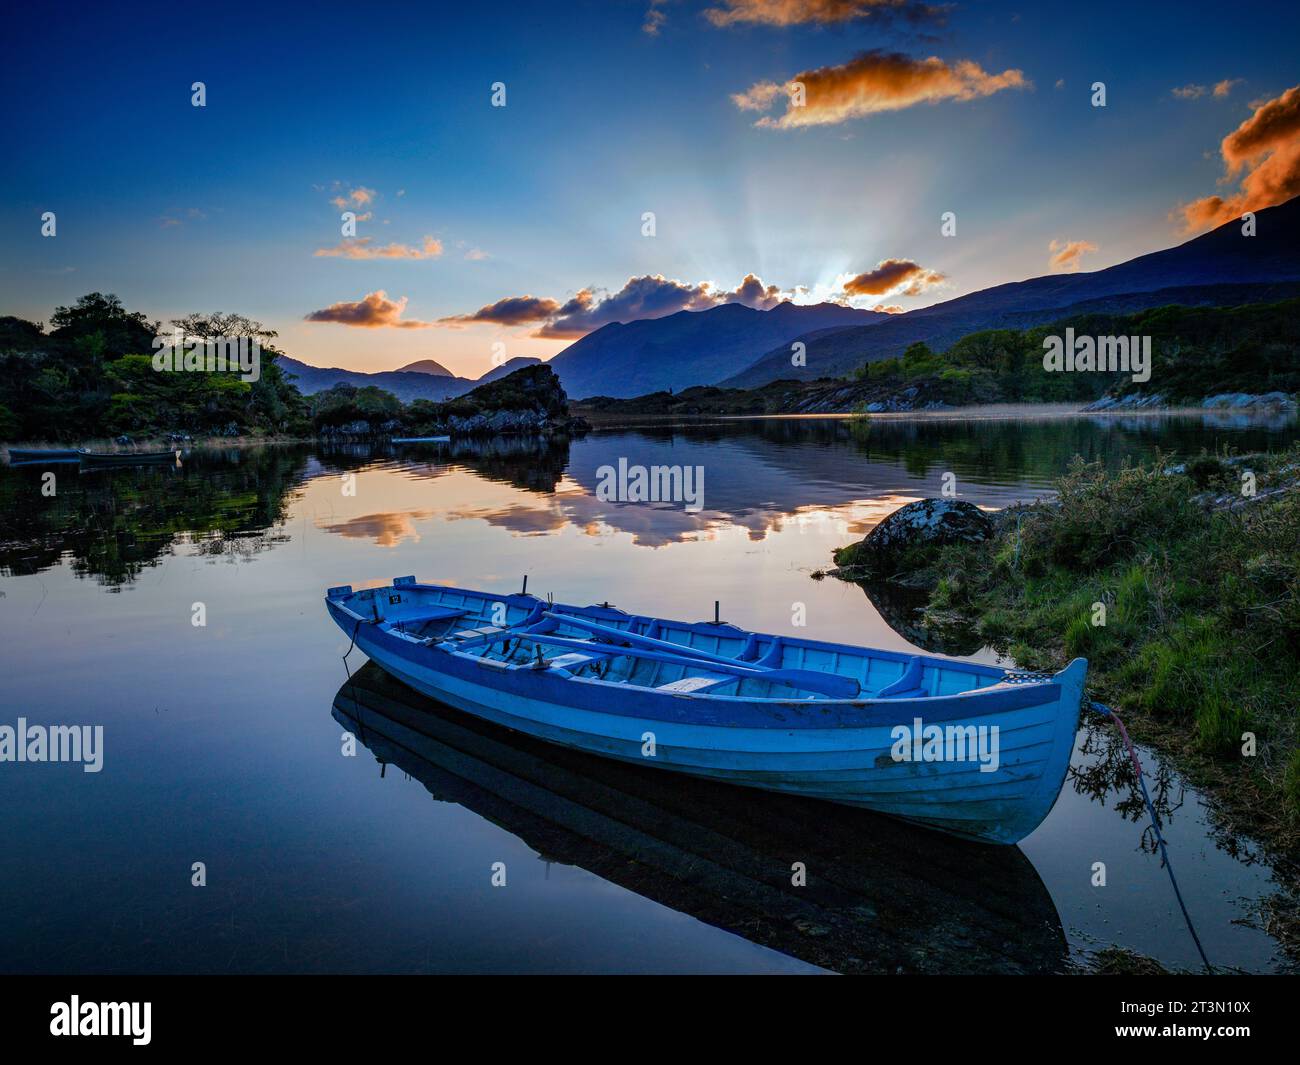 A blue fishing boat sits on the Upper Lake Killarney, with the sun setting over Macgillycuddy's Reeks, Killarney National Park, County Kerry, Ireland Stock Photo